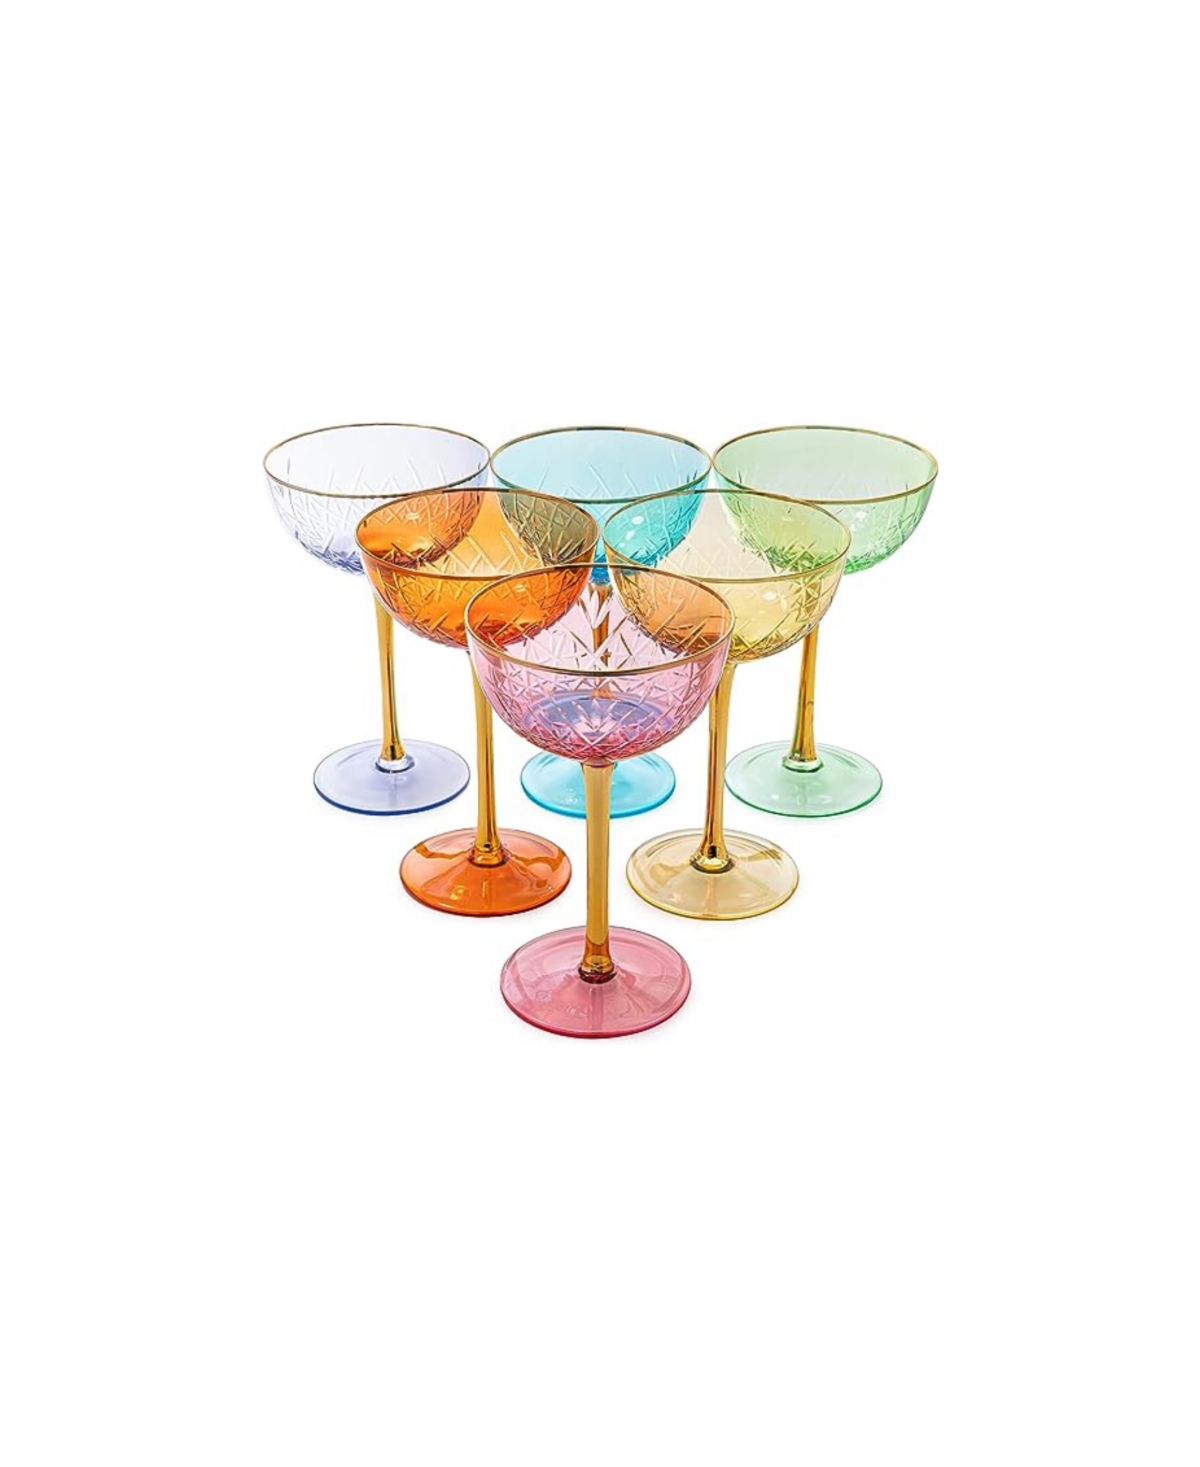 The Wine Savant Vintage-like Art Deco Coupes, Set Of 6 In Multicolor